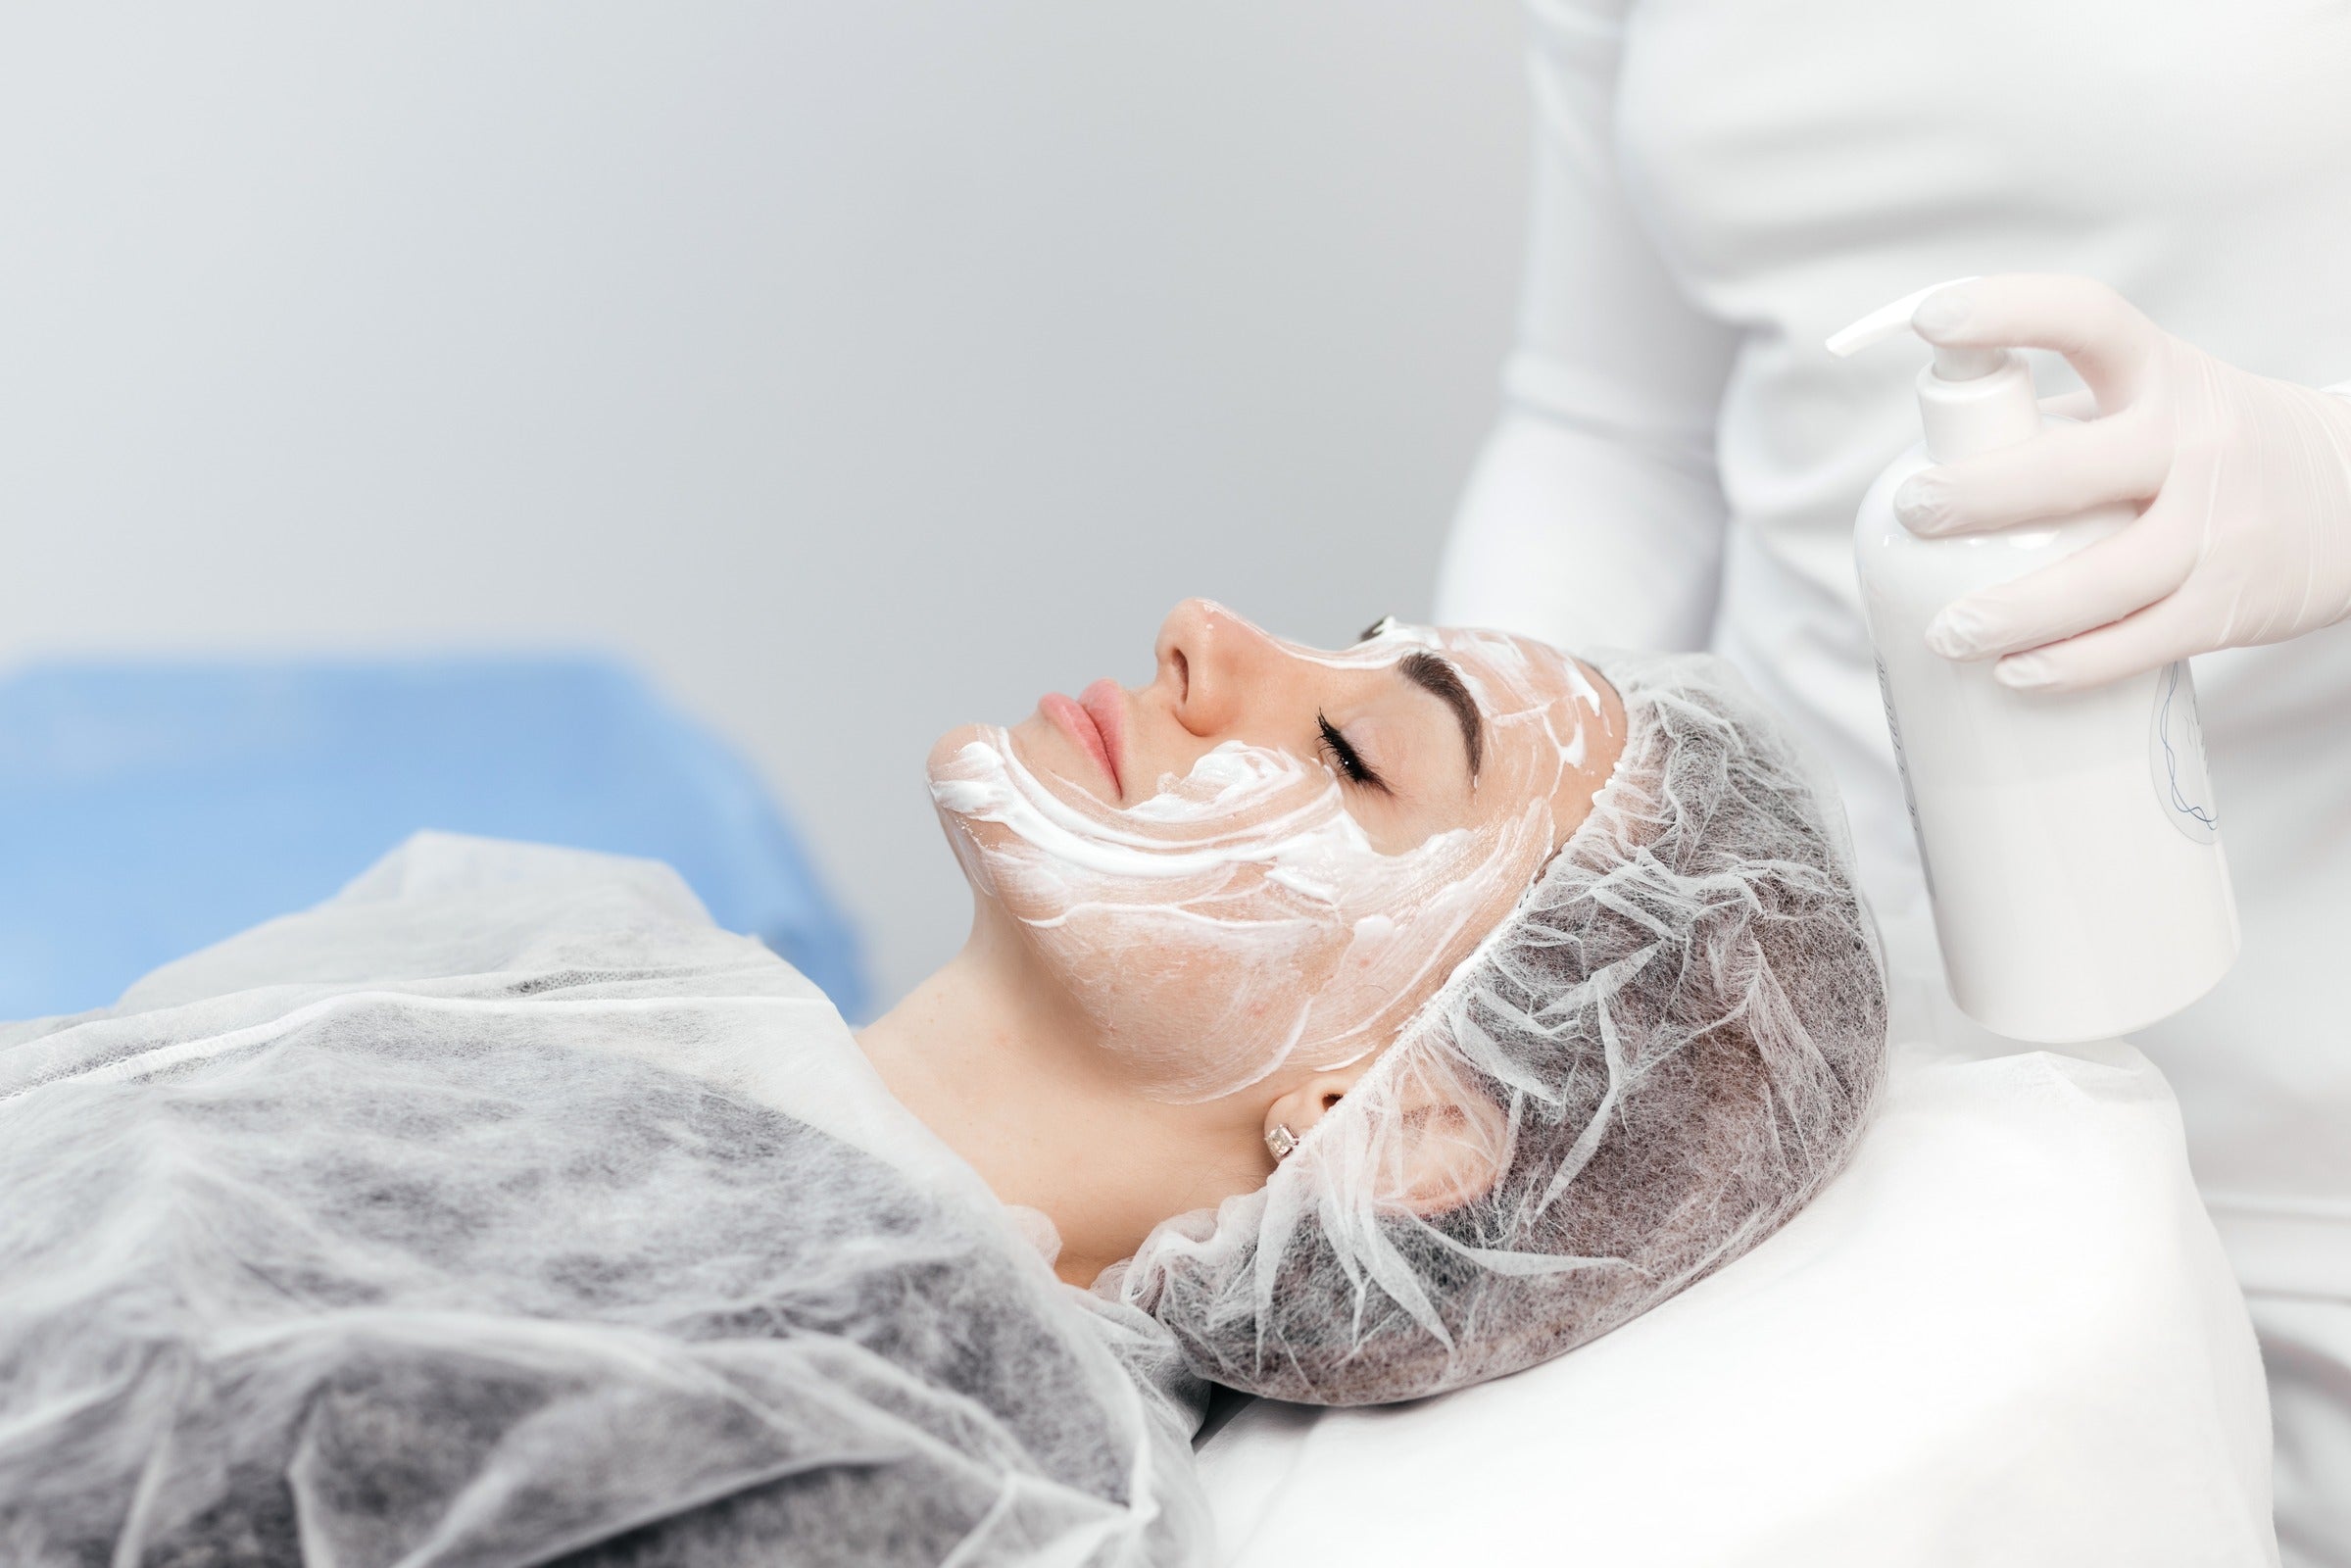 7 factors to consider when choosing a numbing cream for your face